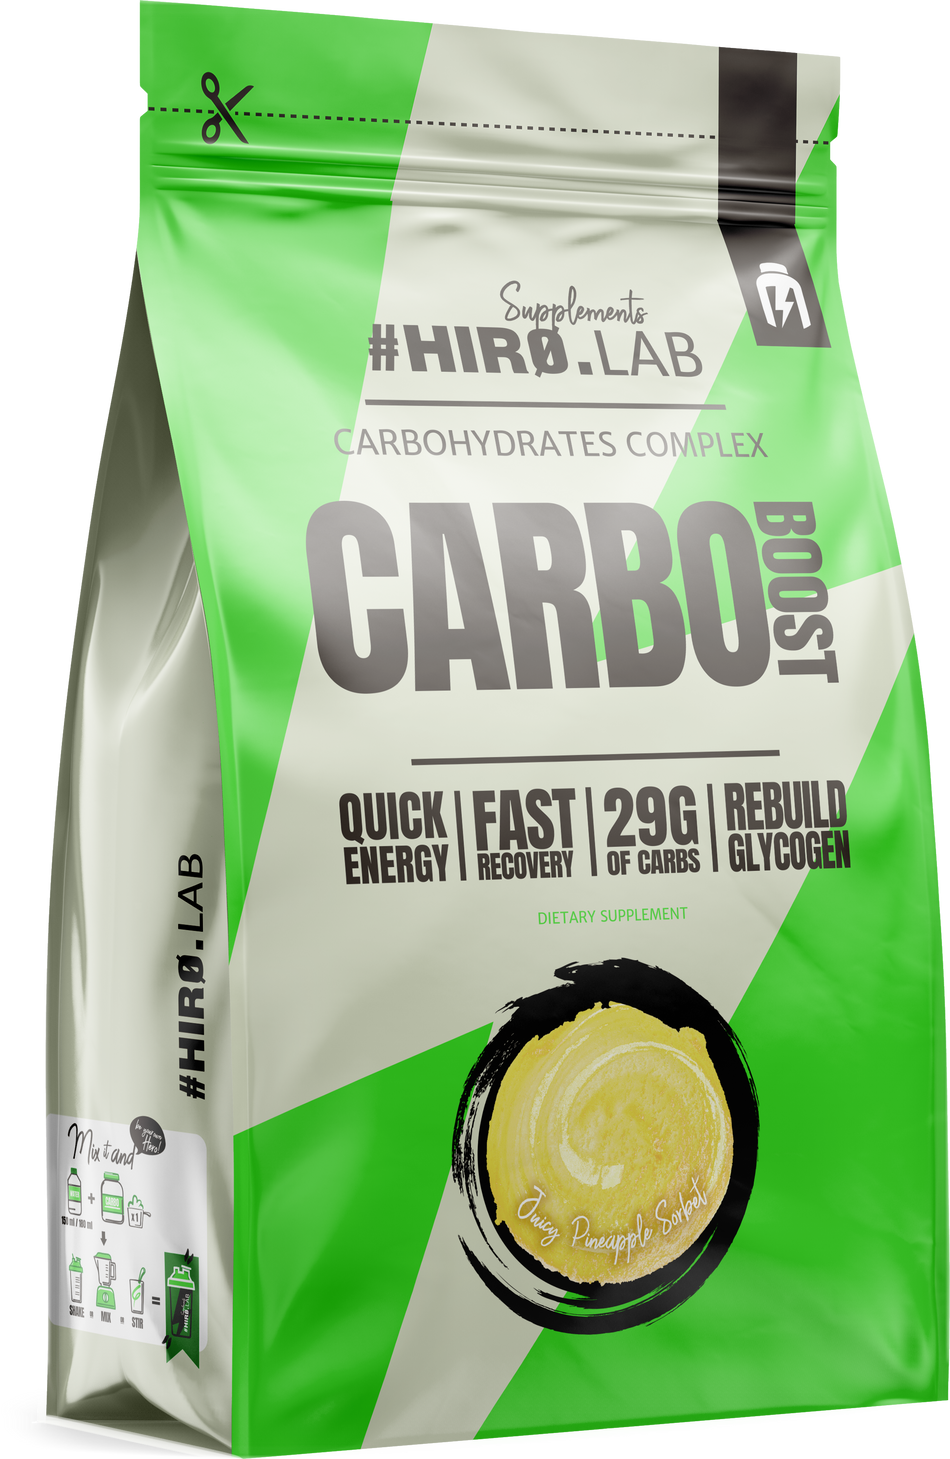 Carbo Boost / Carbohydrates Complex